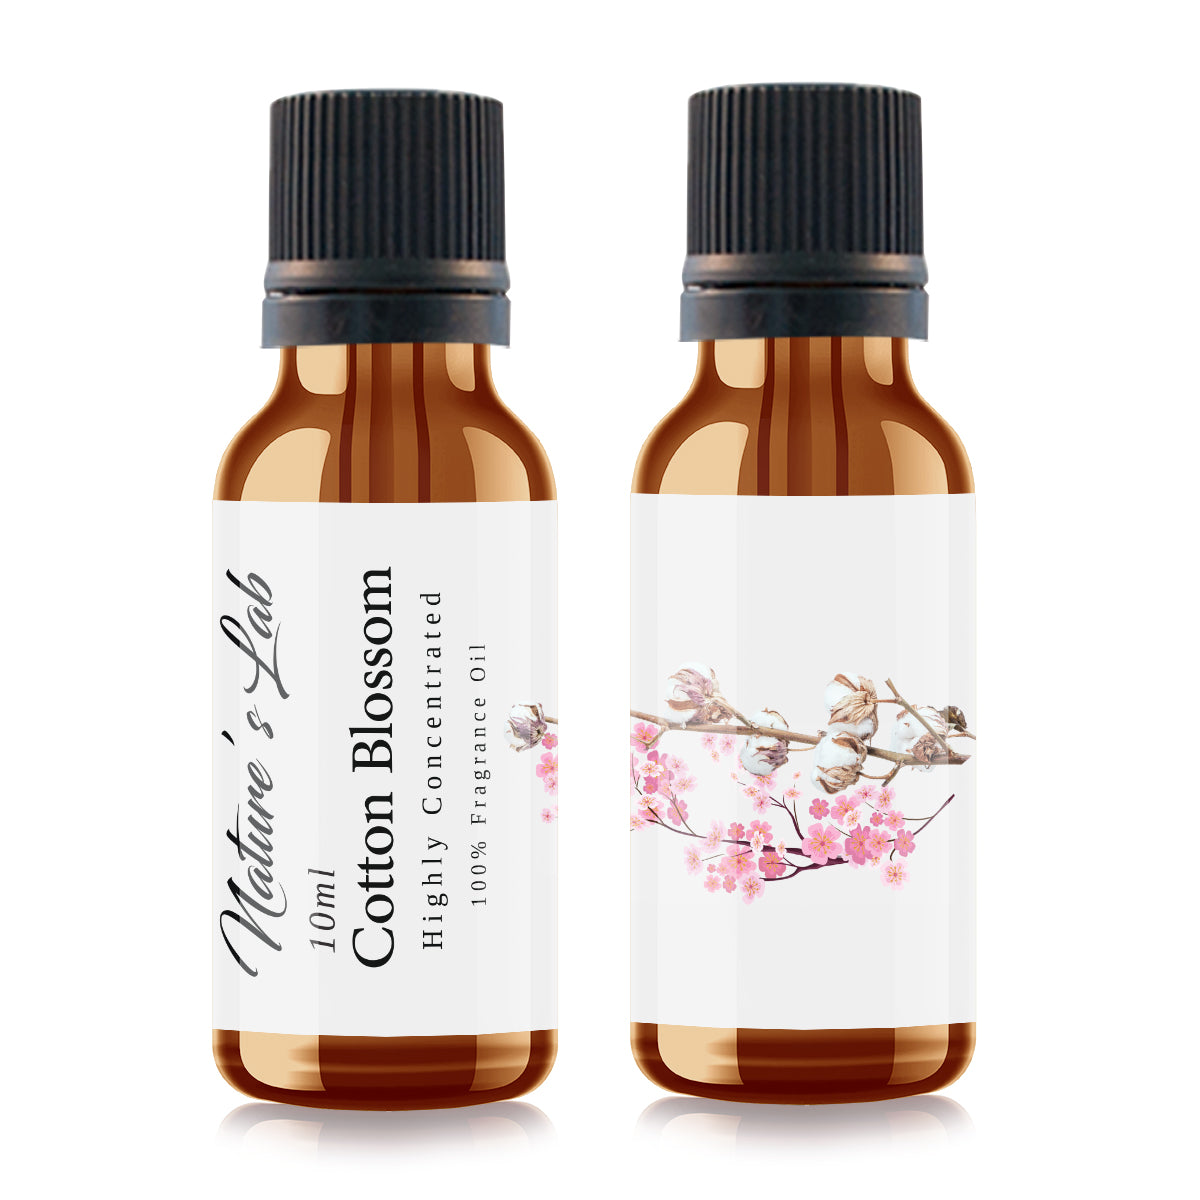 Cotton Blossom Fragrance Oil - Natural Sister's / Nature's Lab Store